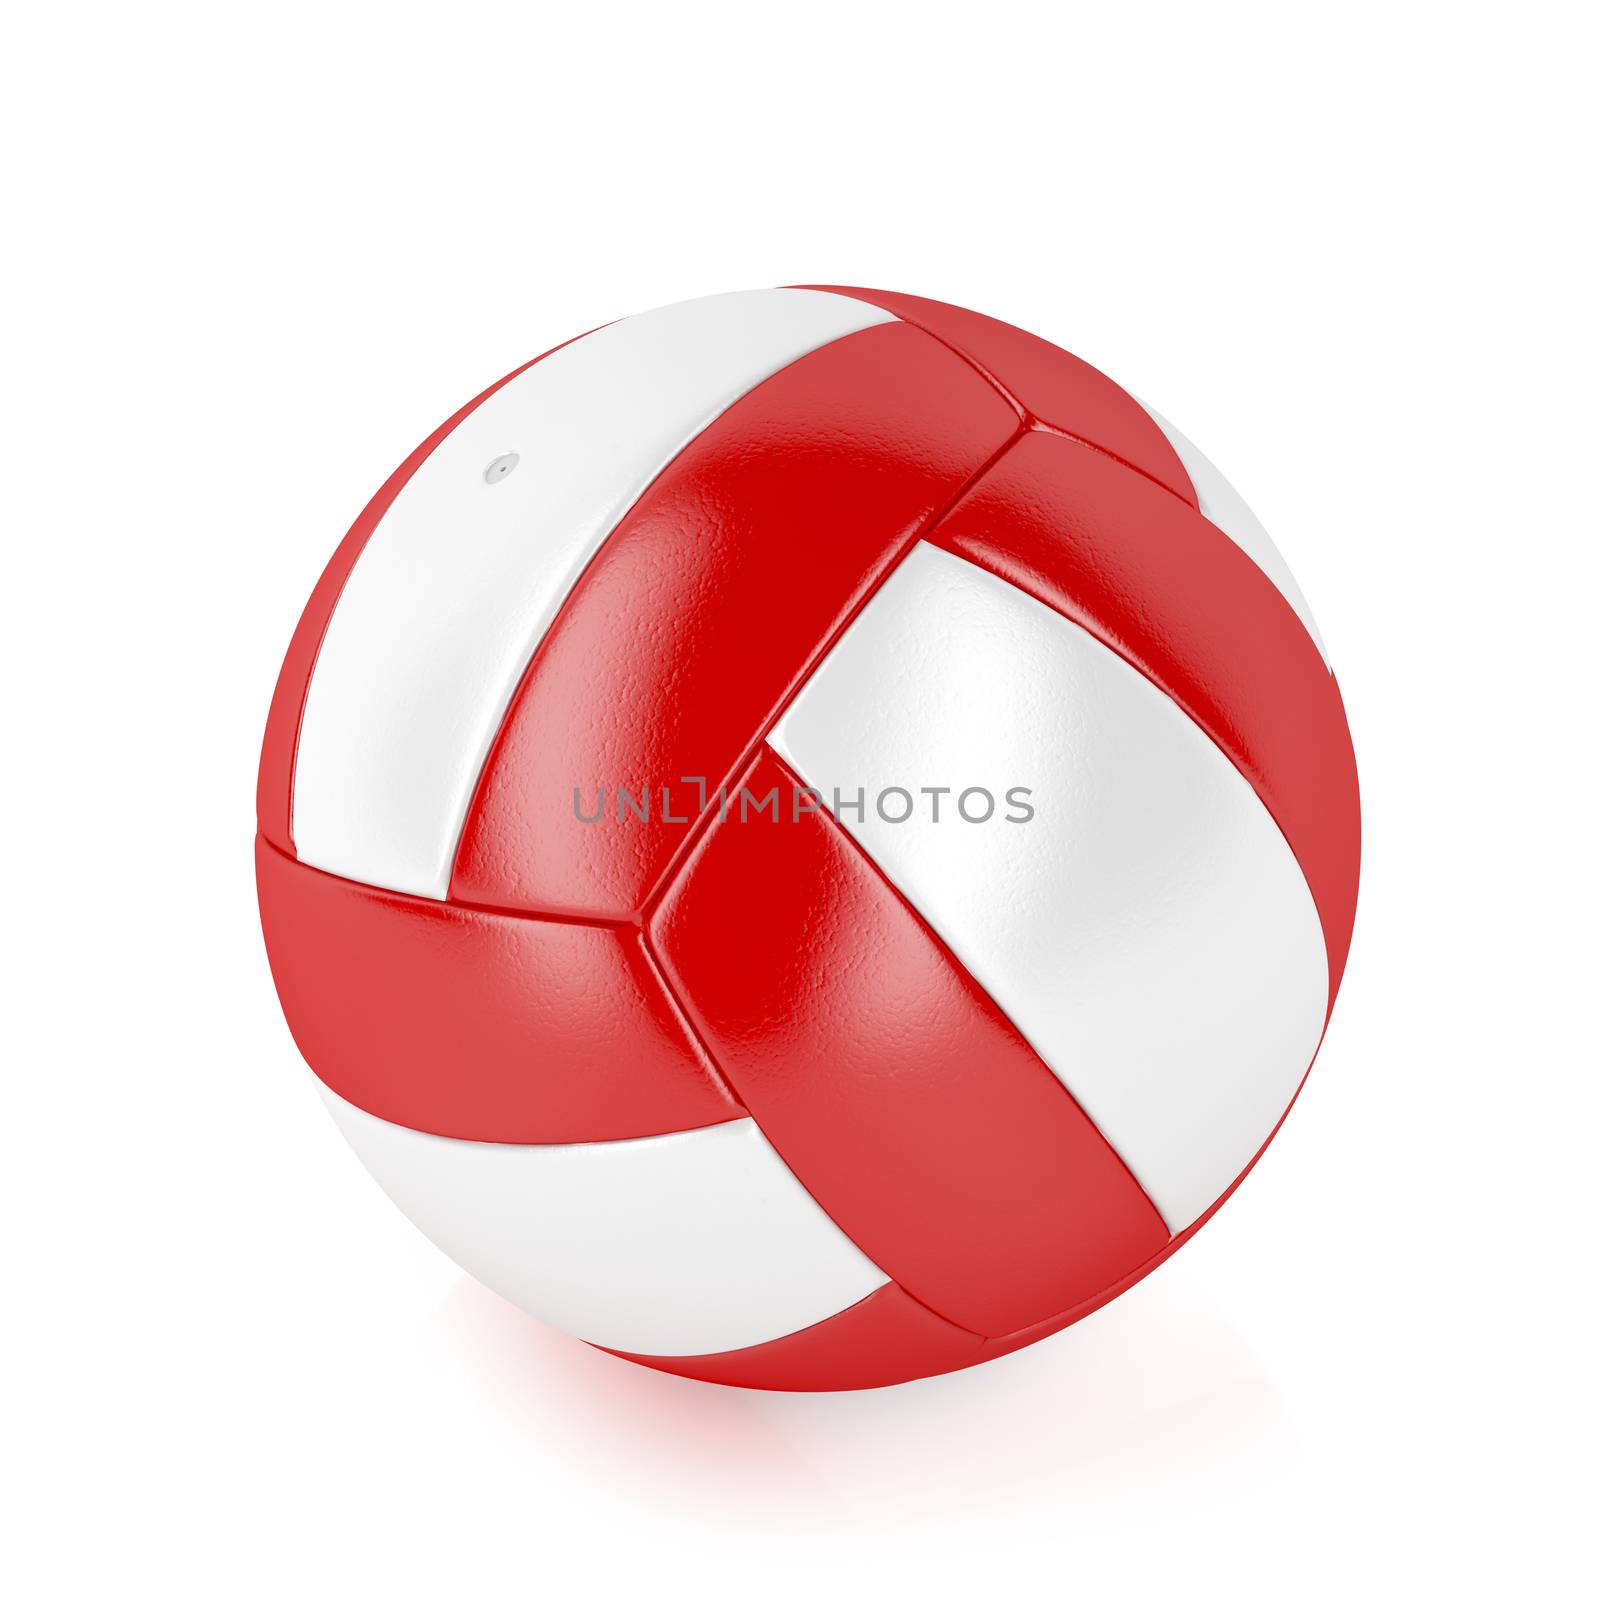 Red and white ball by magraphics